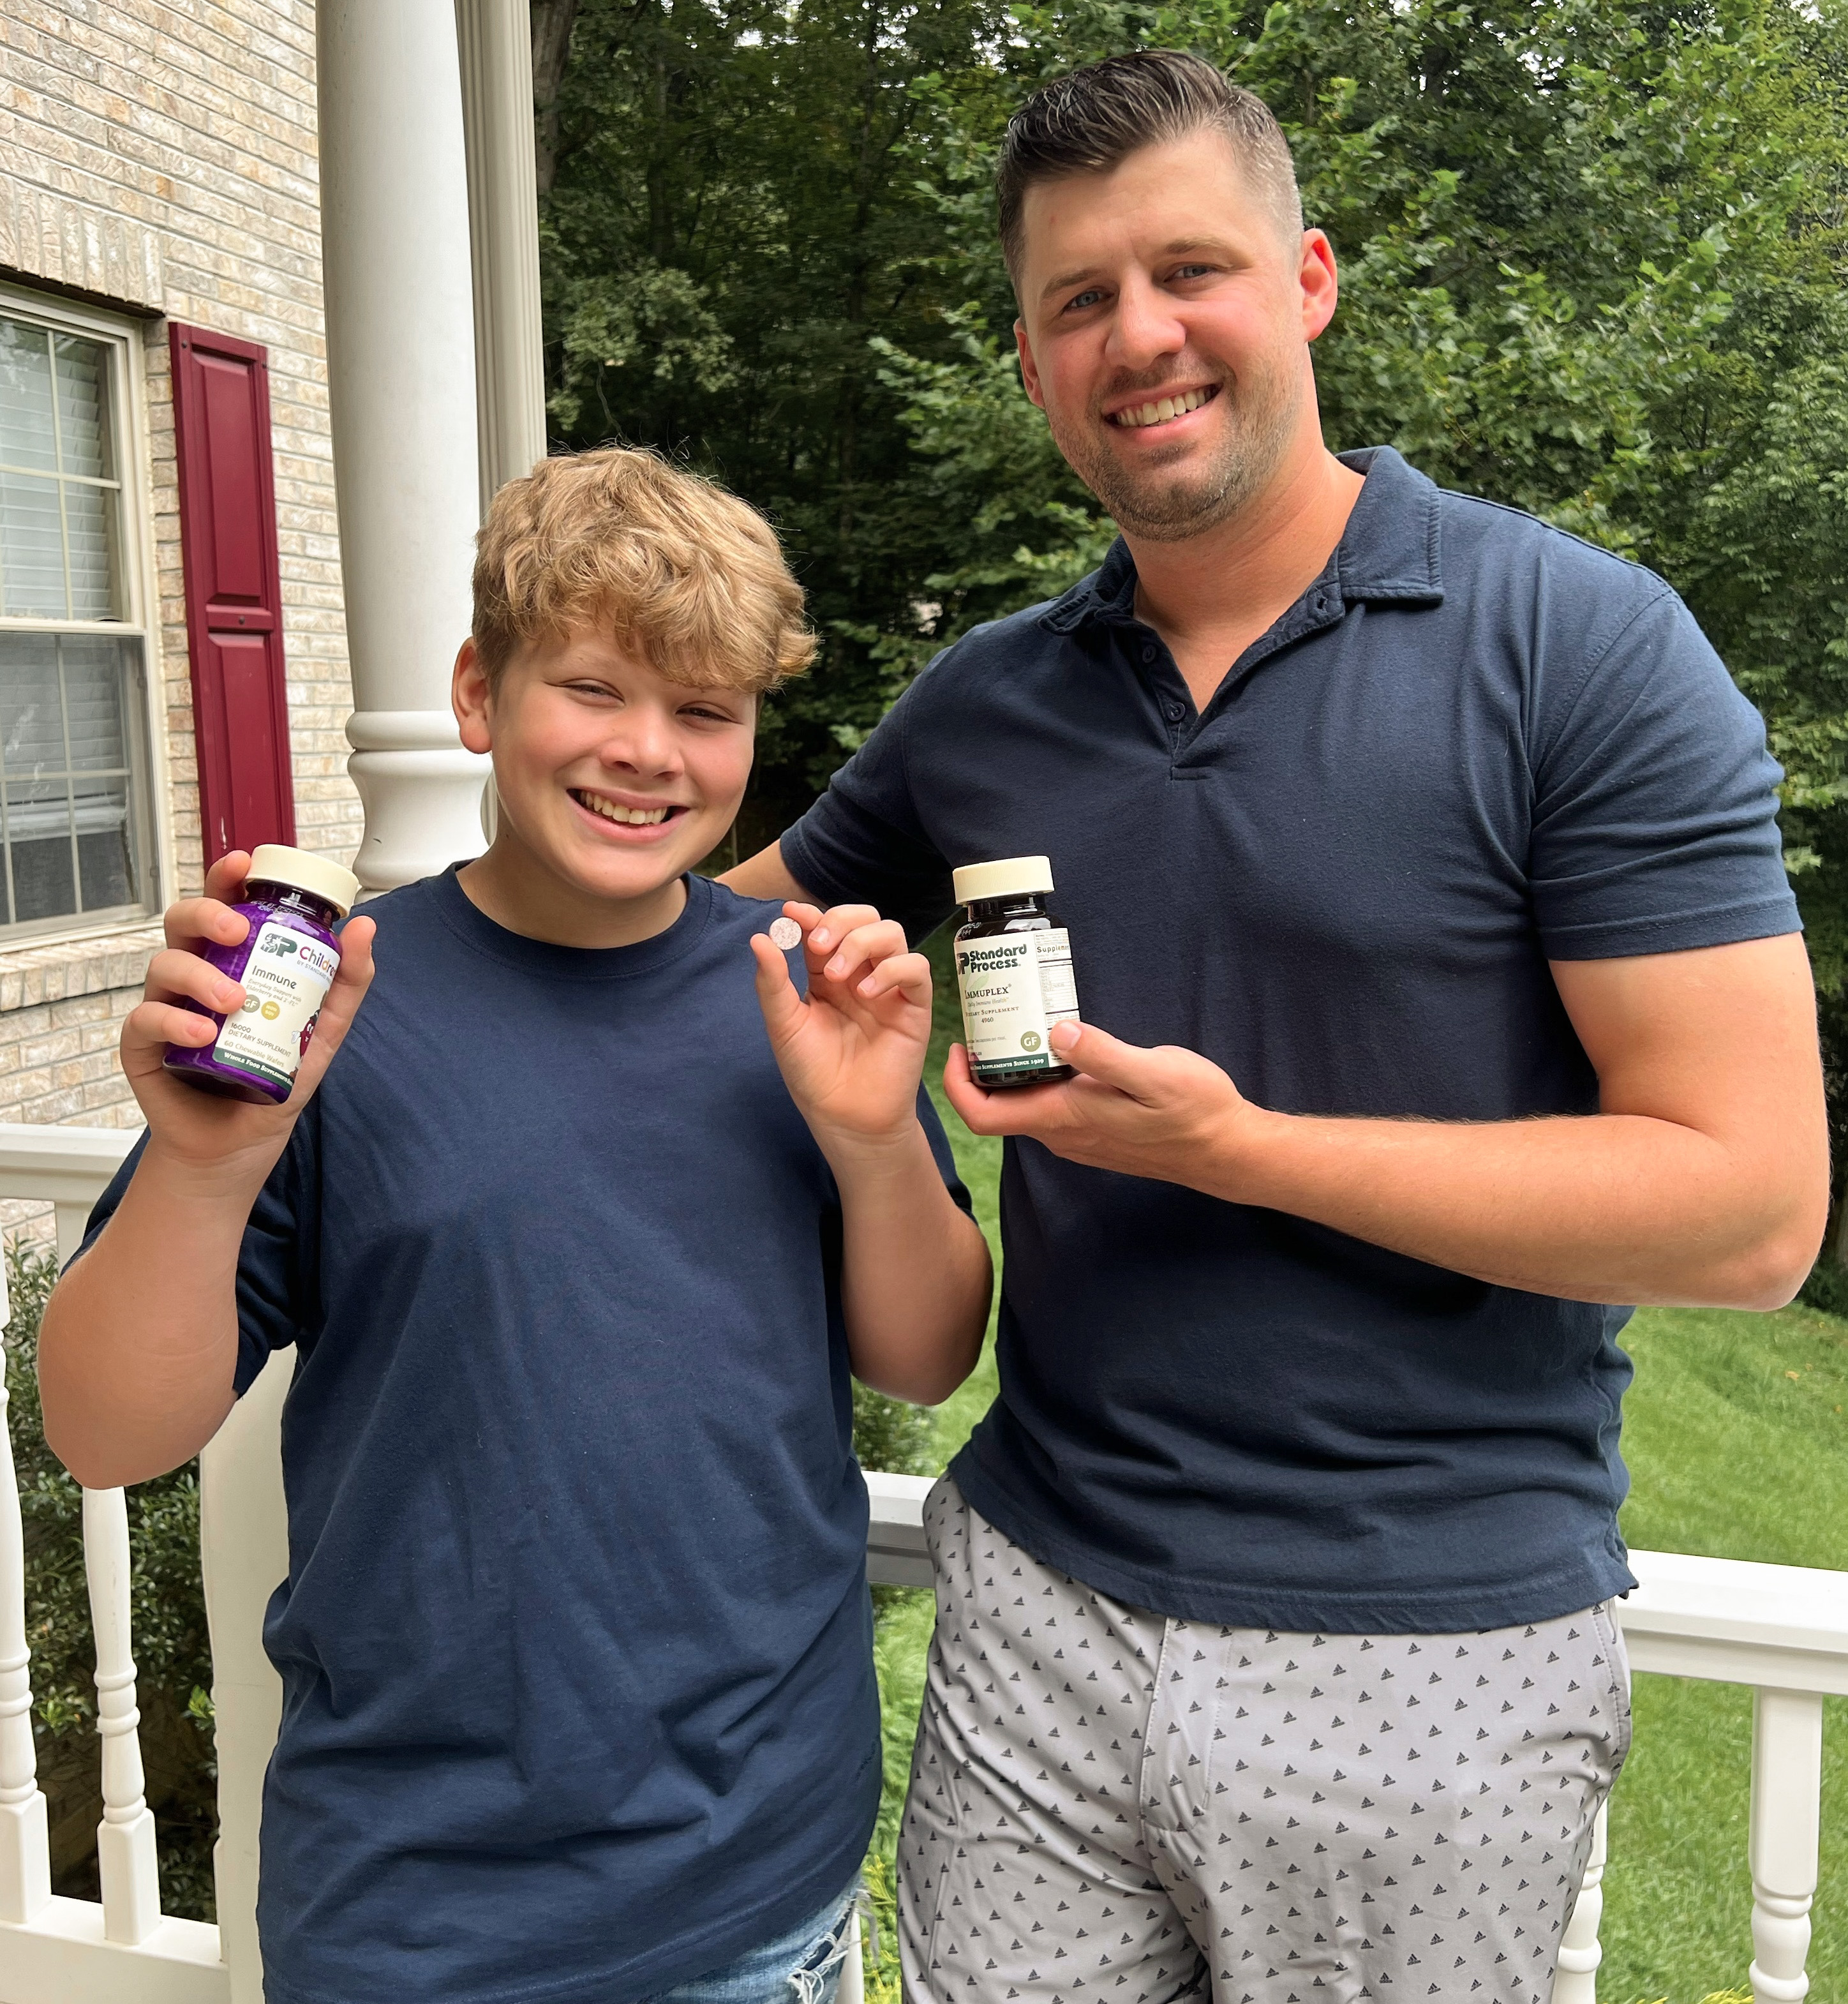 man and boy holding vitamins - back to school items